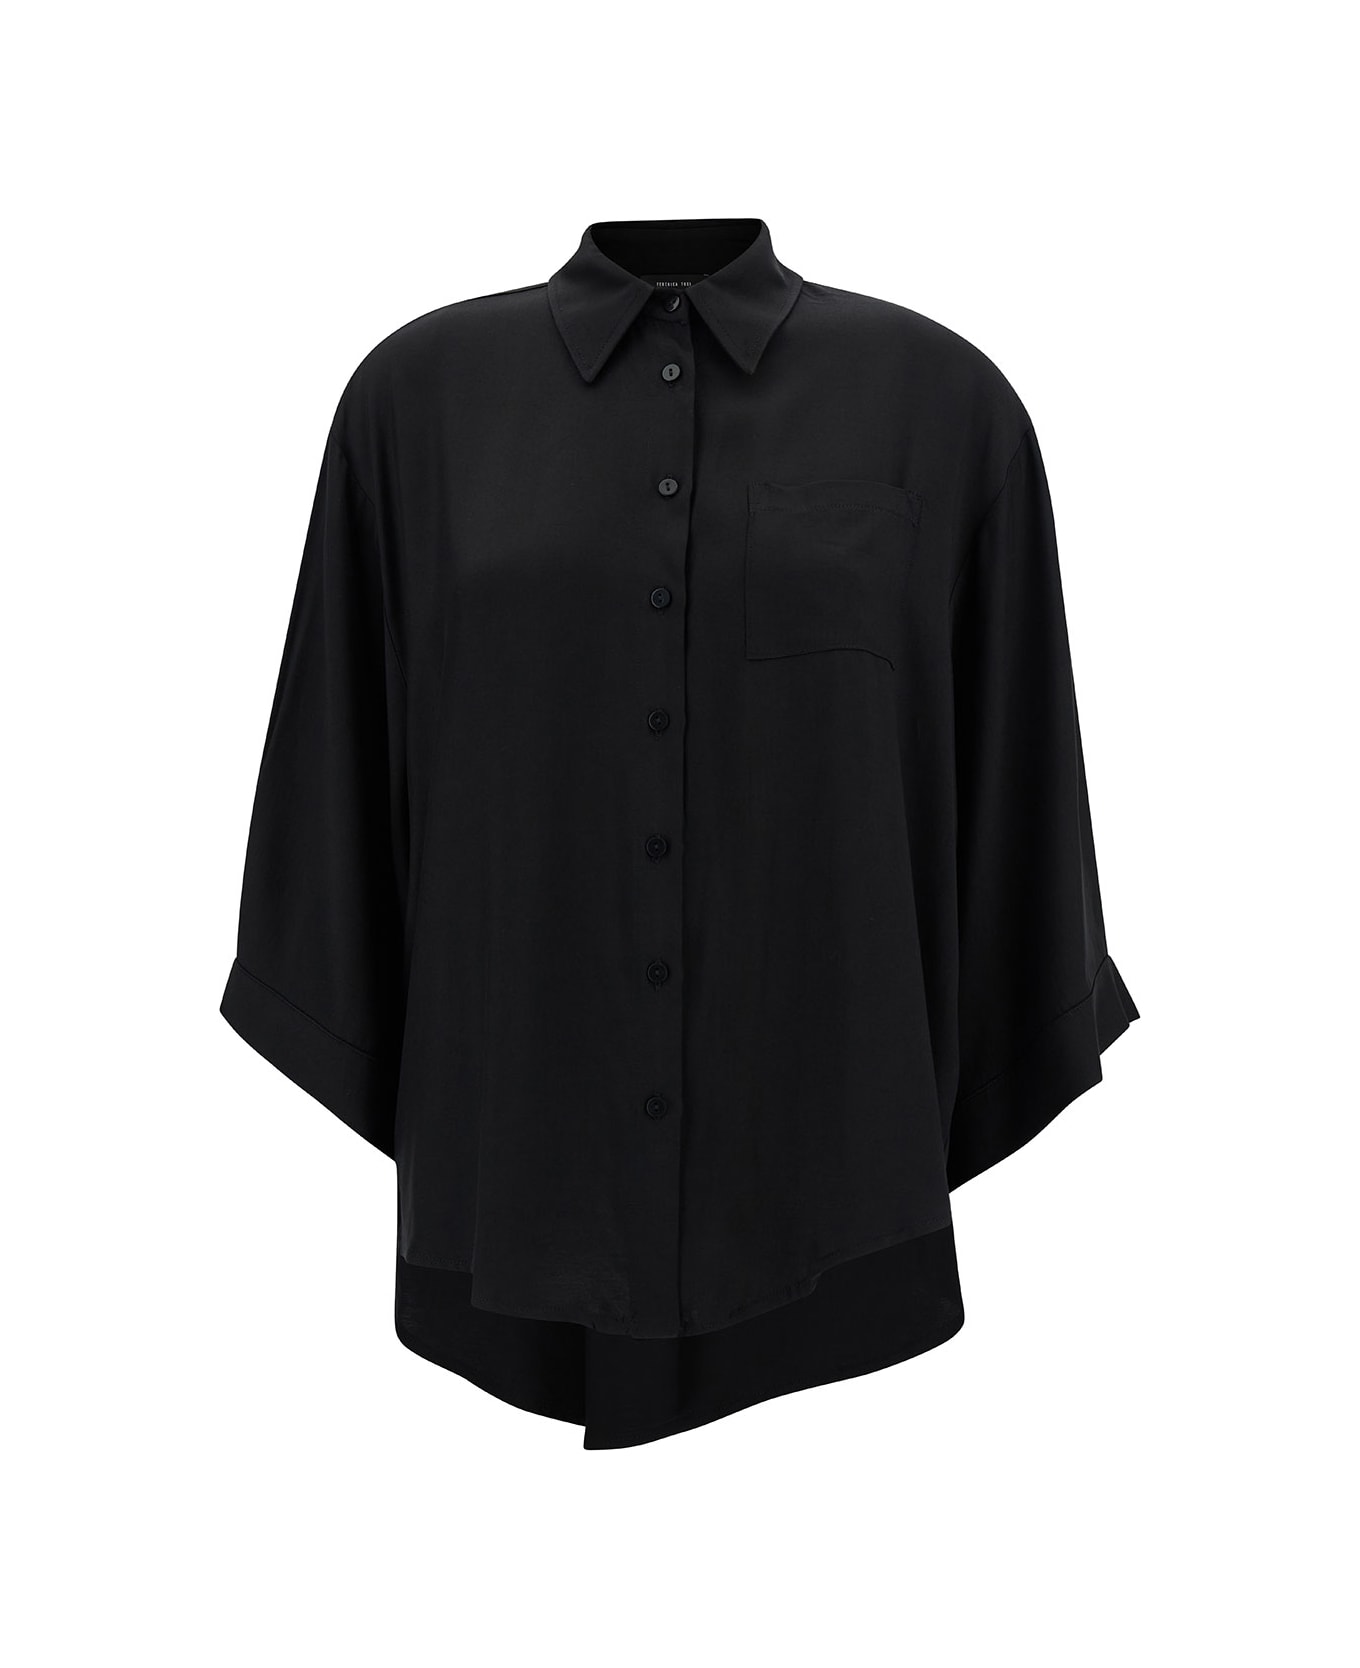 Federica Tosi Oversized Black Shirt With Patch Pockets In Viscose Woman - Black